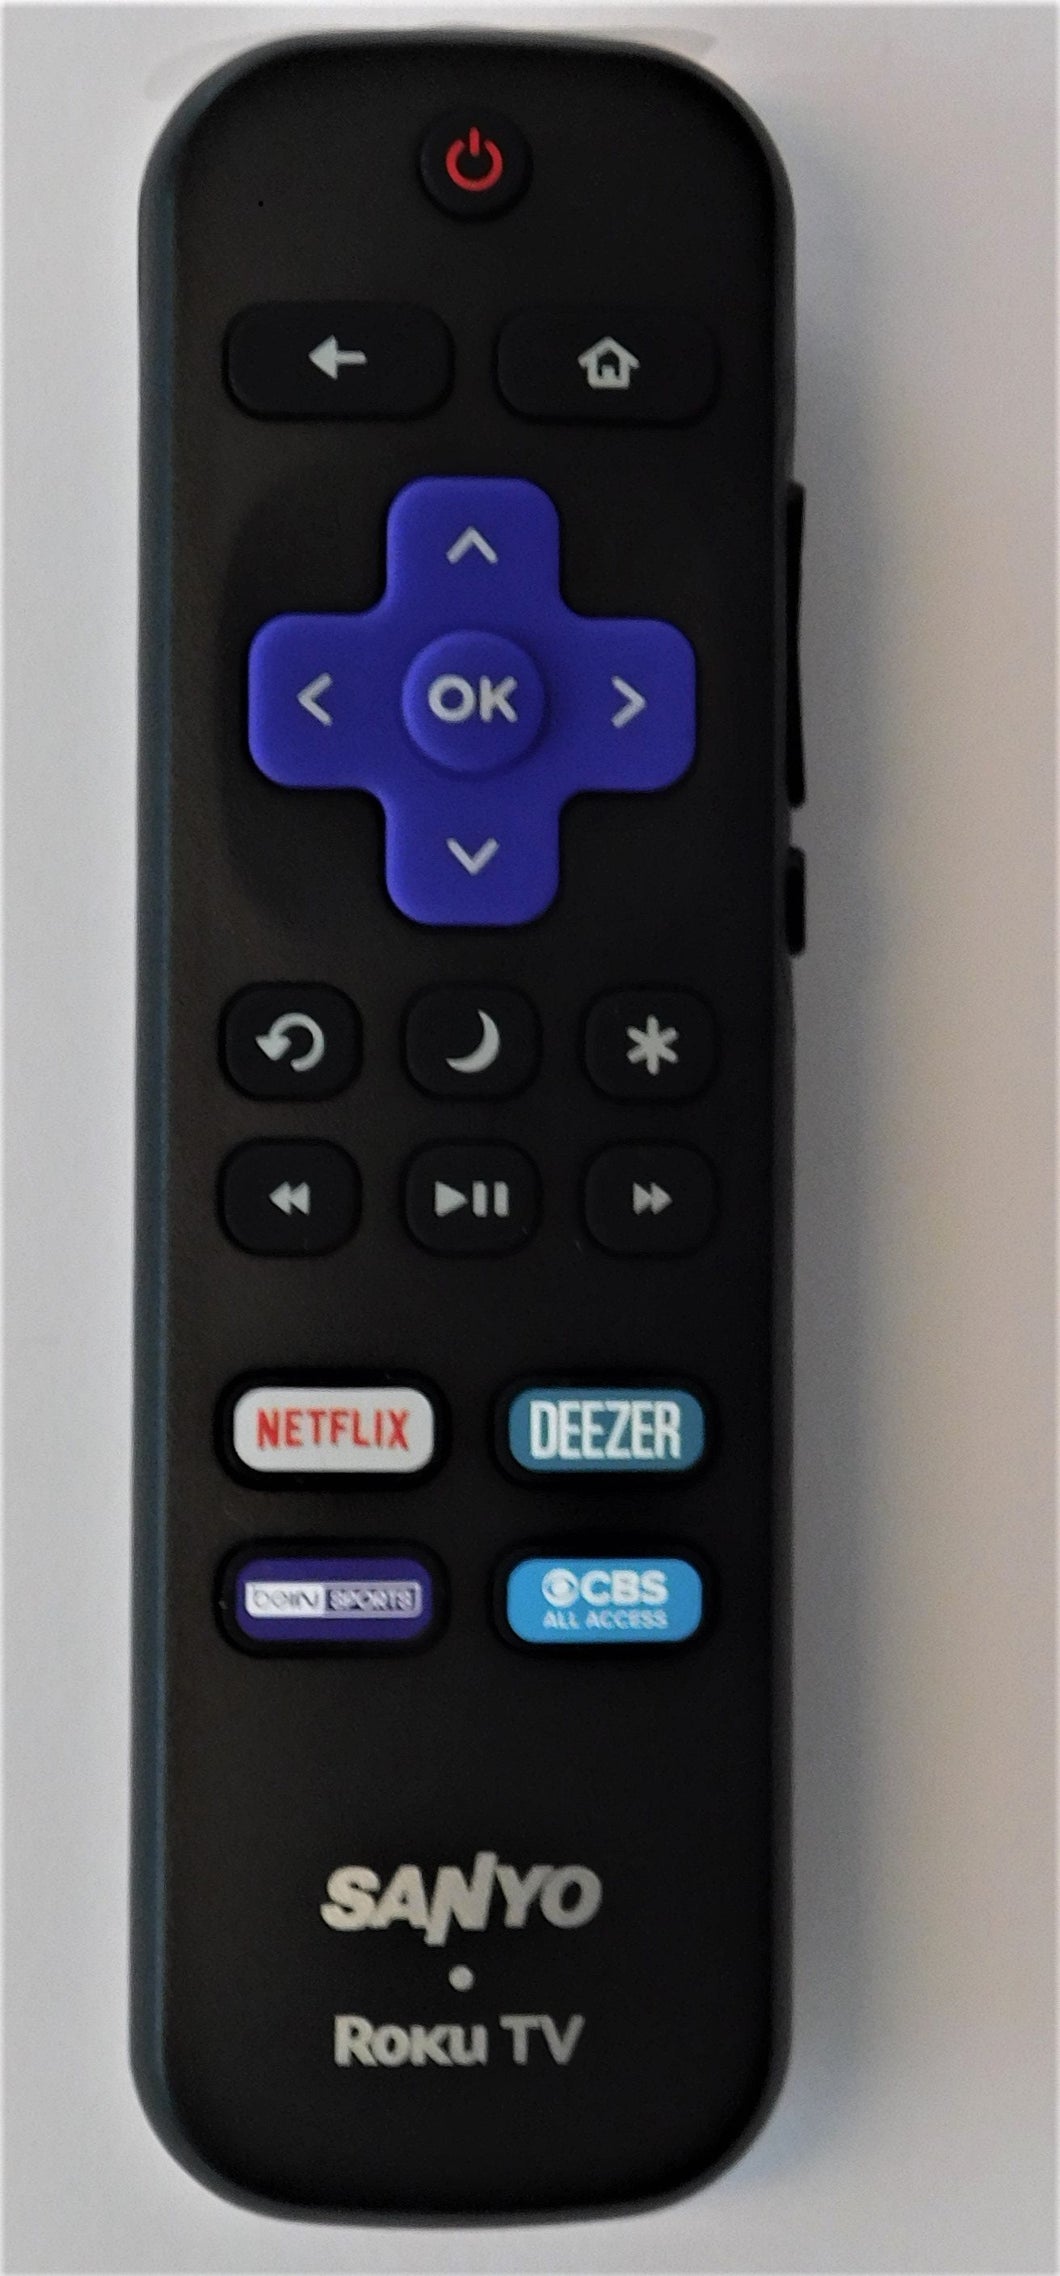 OEM replacement remote control for Sanyo Roku TV URMT21CND008